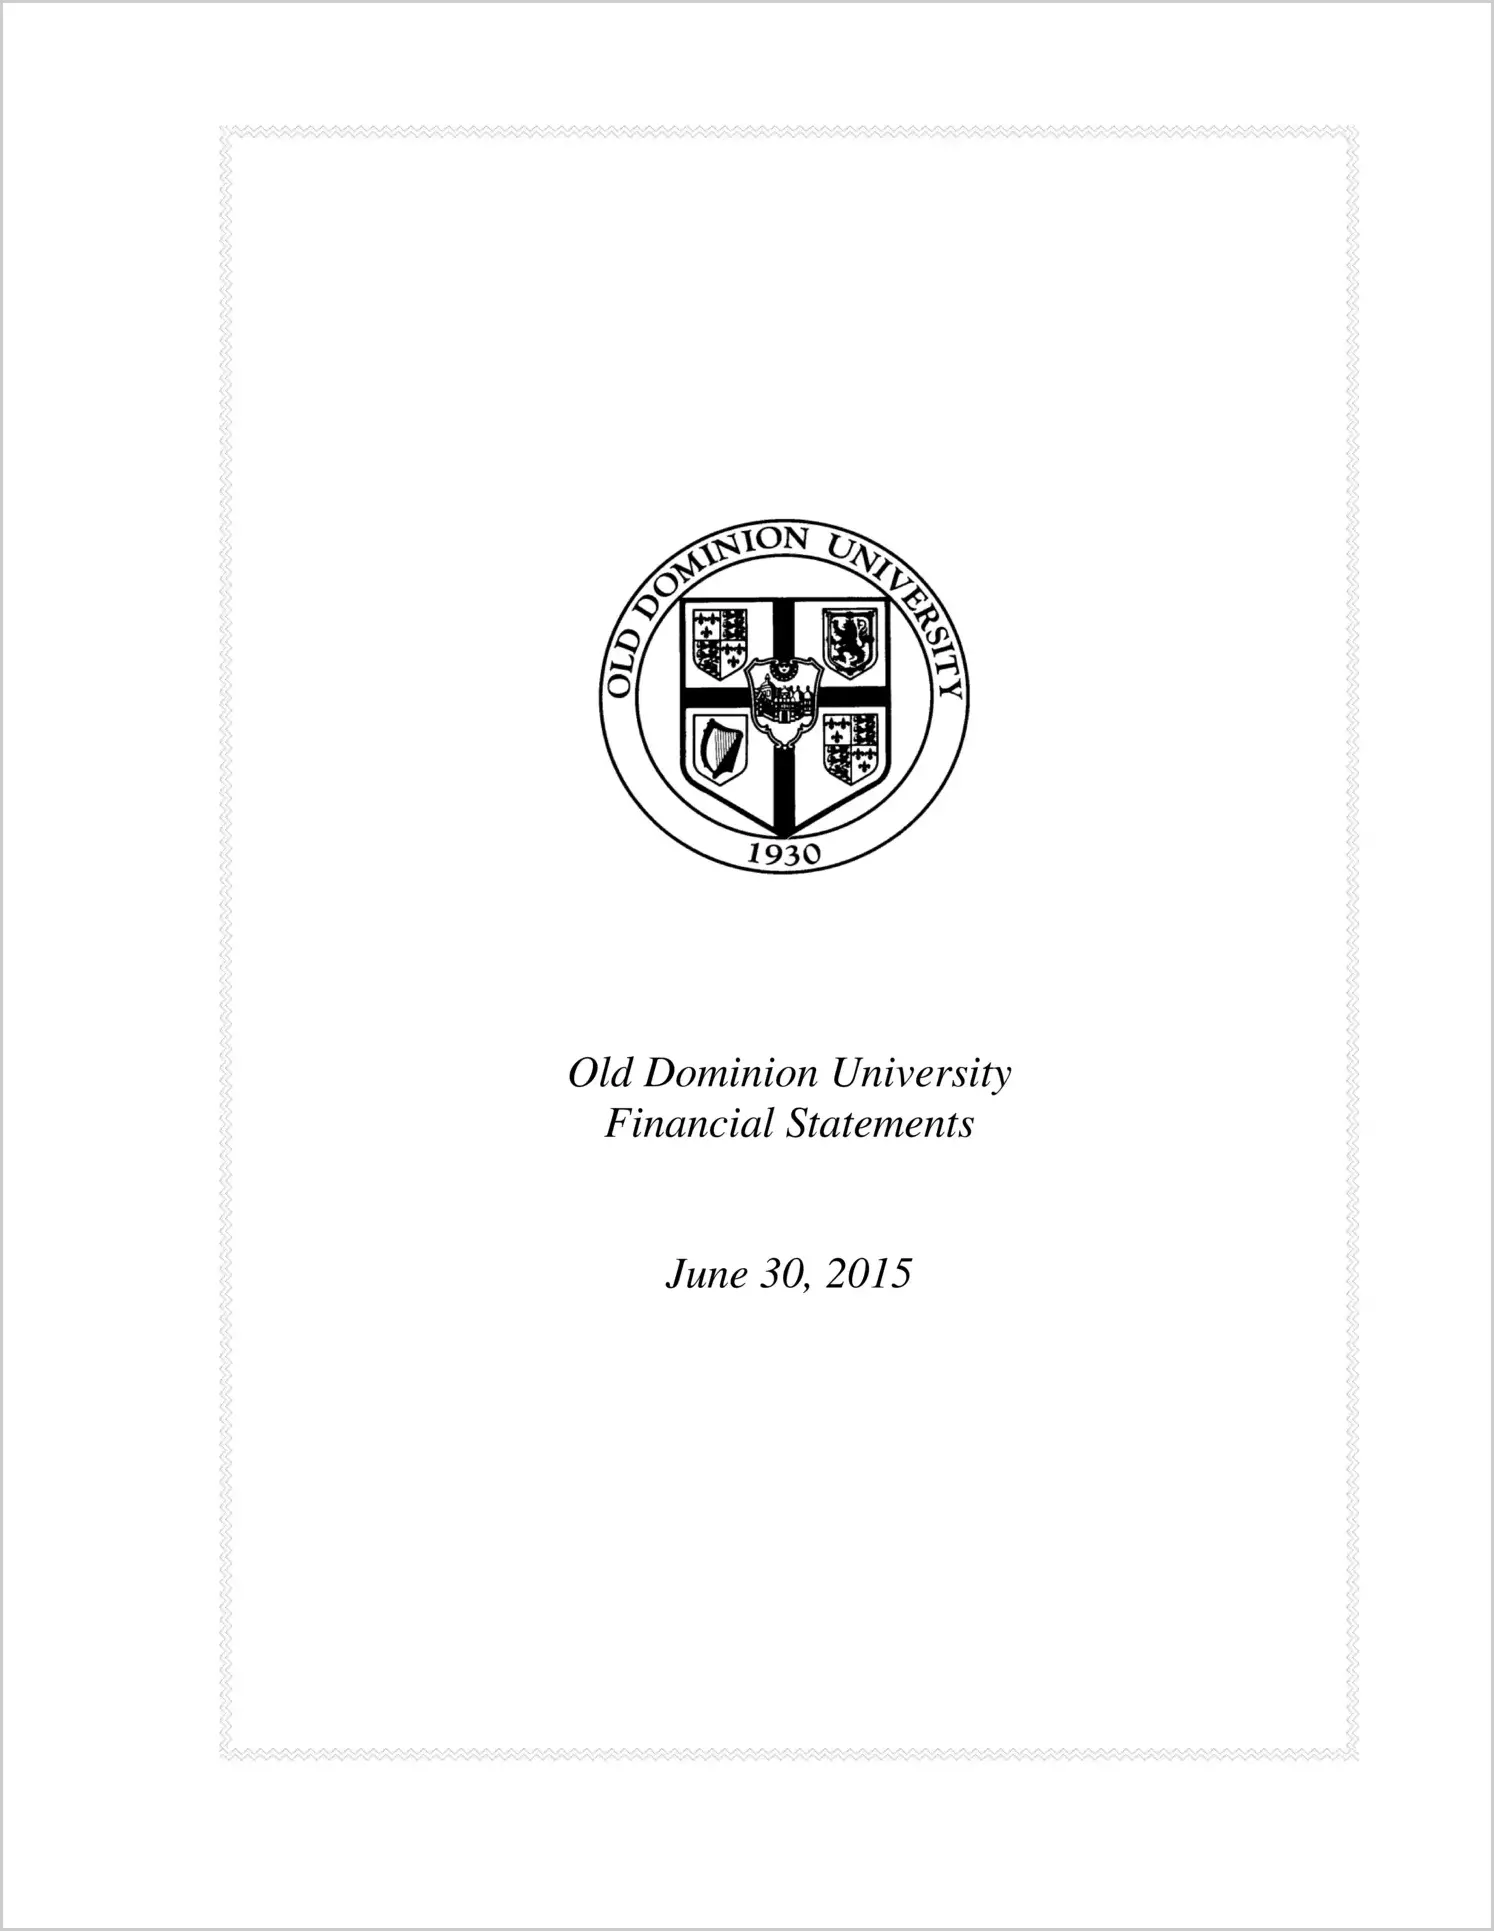 Old Dominion University Financial Statements for the year ended June 30, 2015